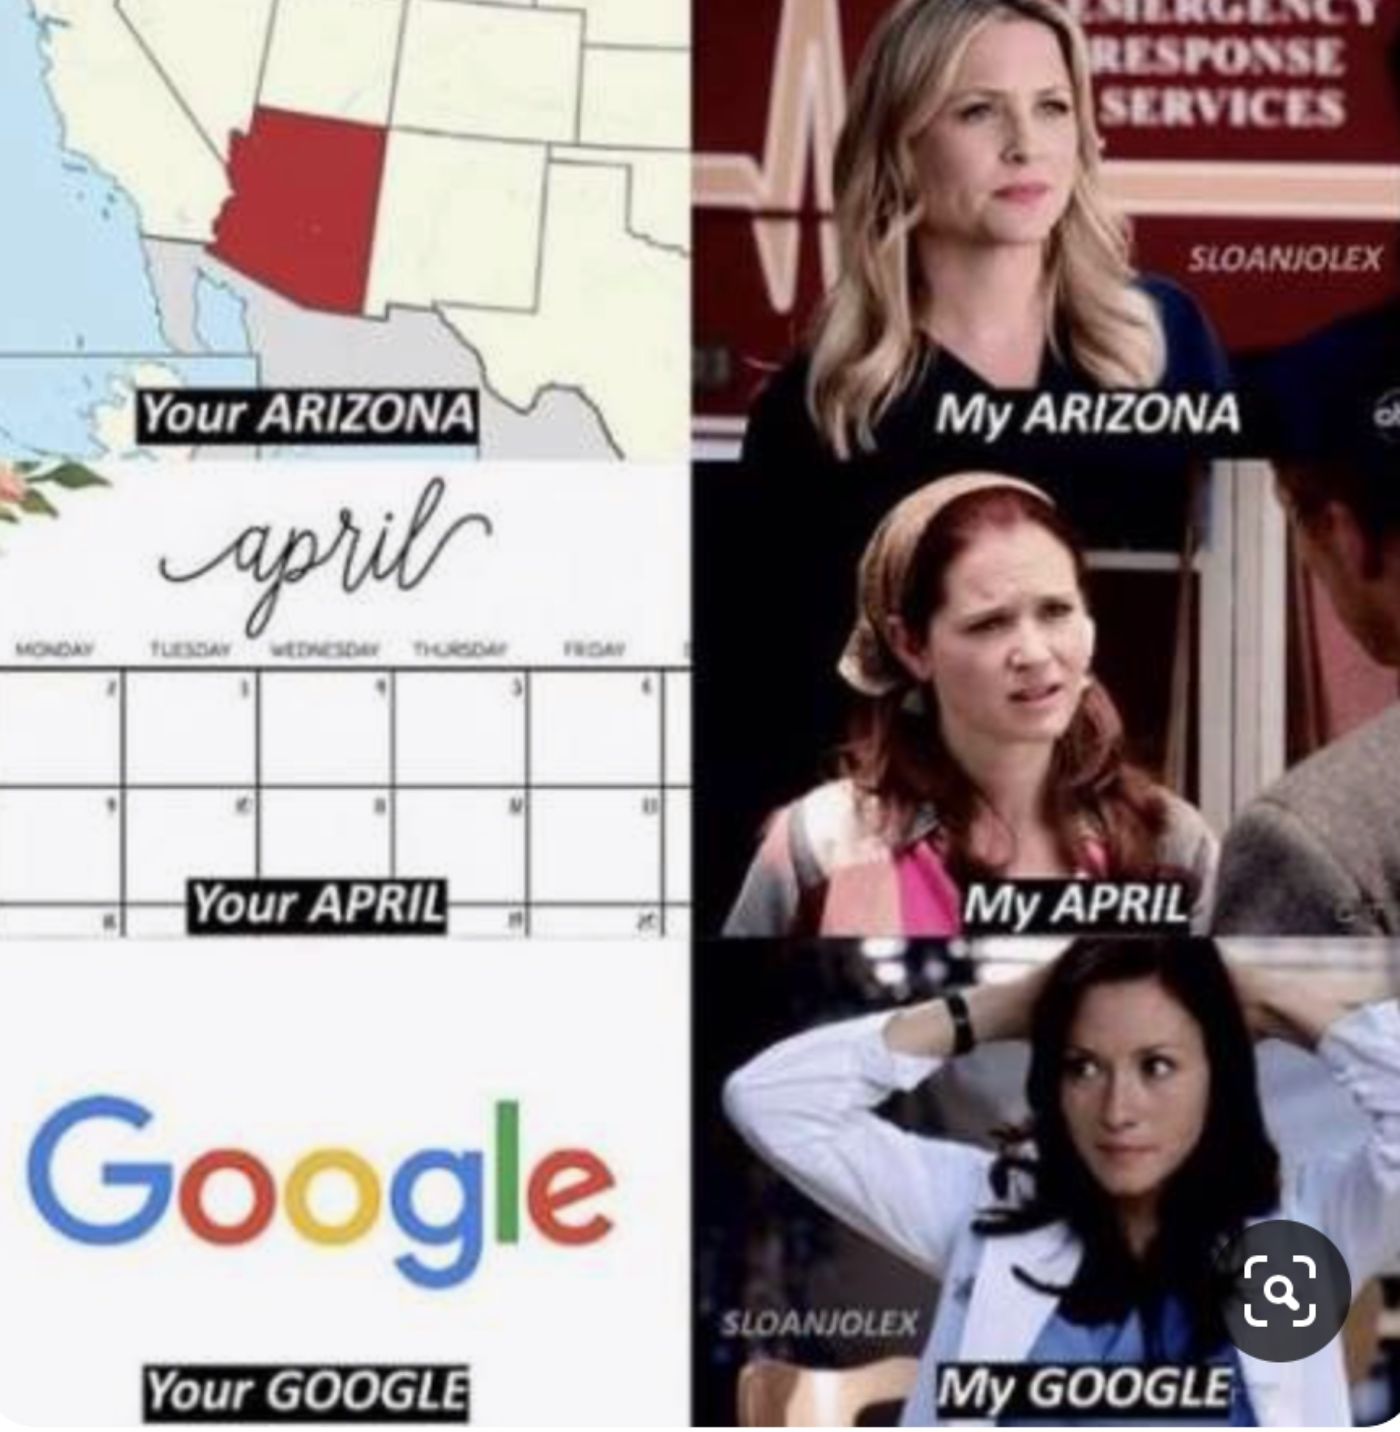 10 Greys Anatomy Memes That Will Have You Dying Of Laughter